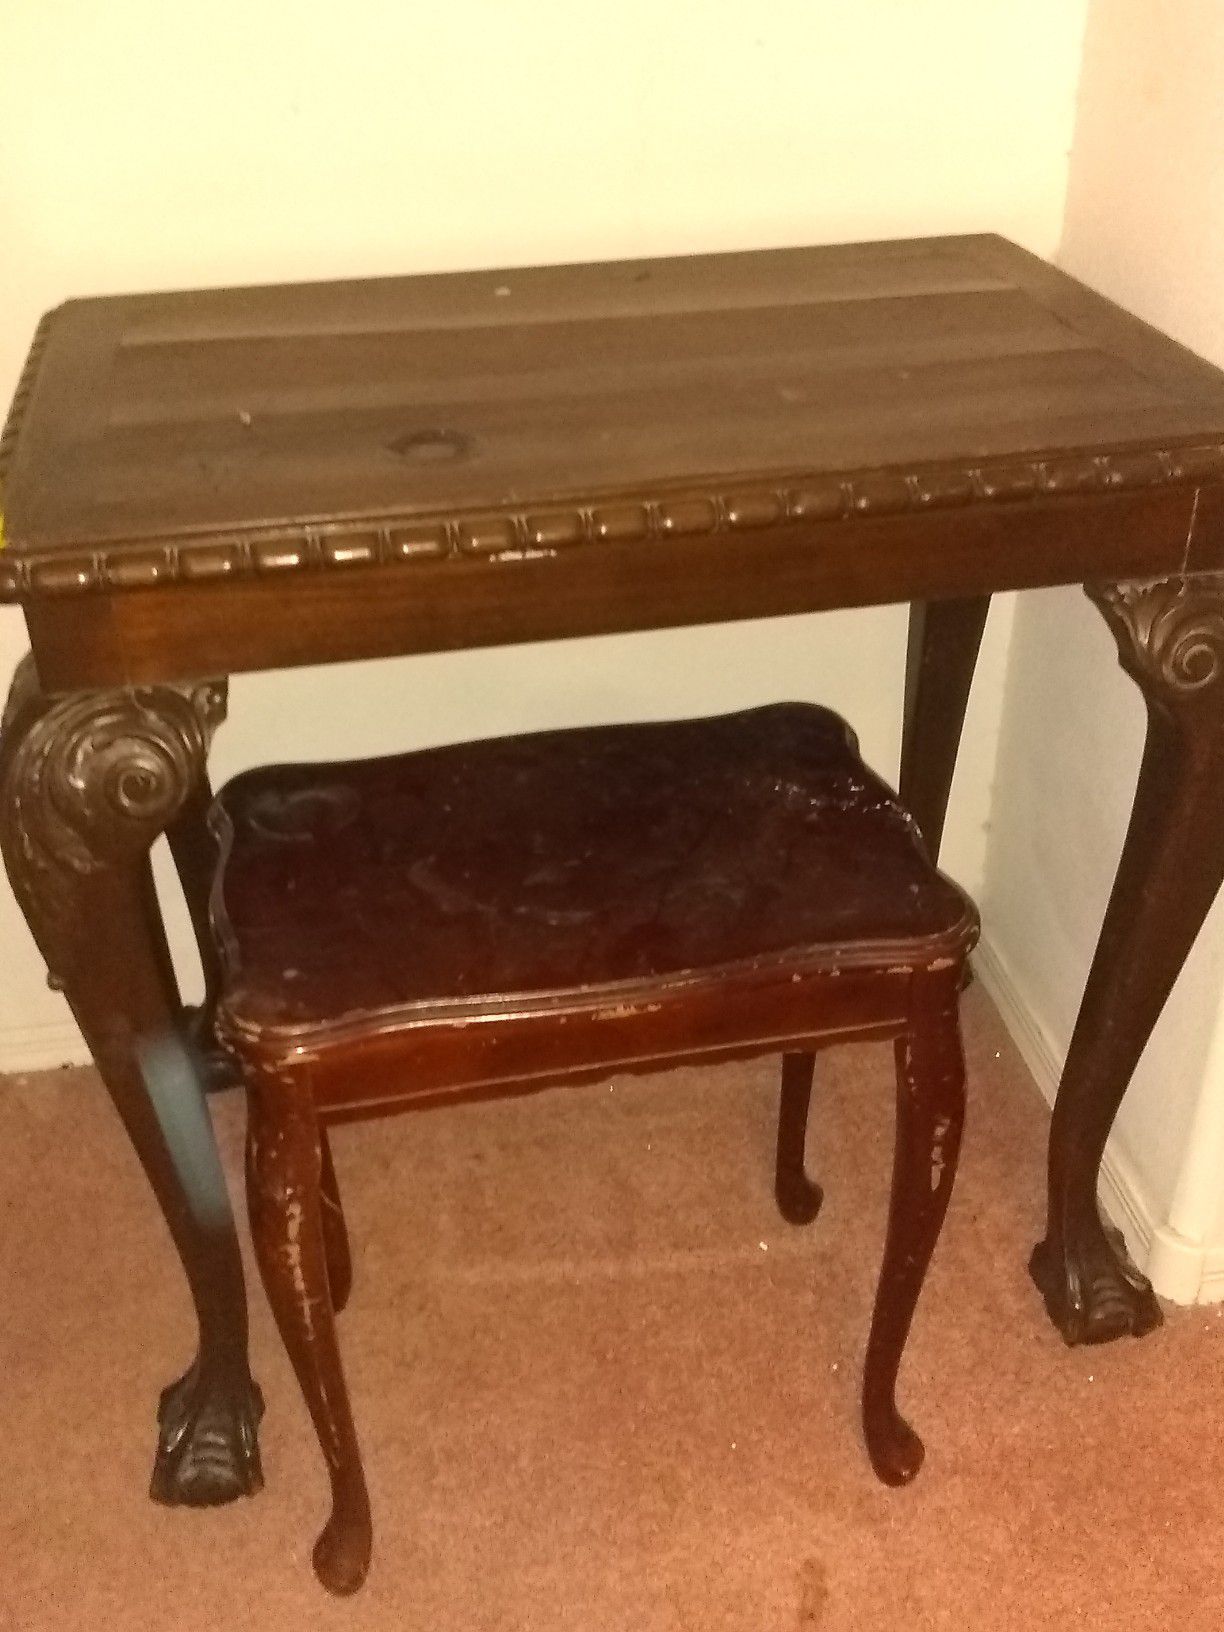 Antique wood table and chair with claw legs